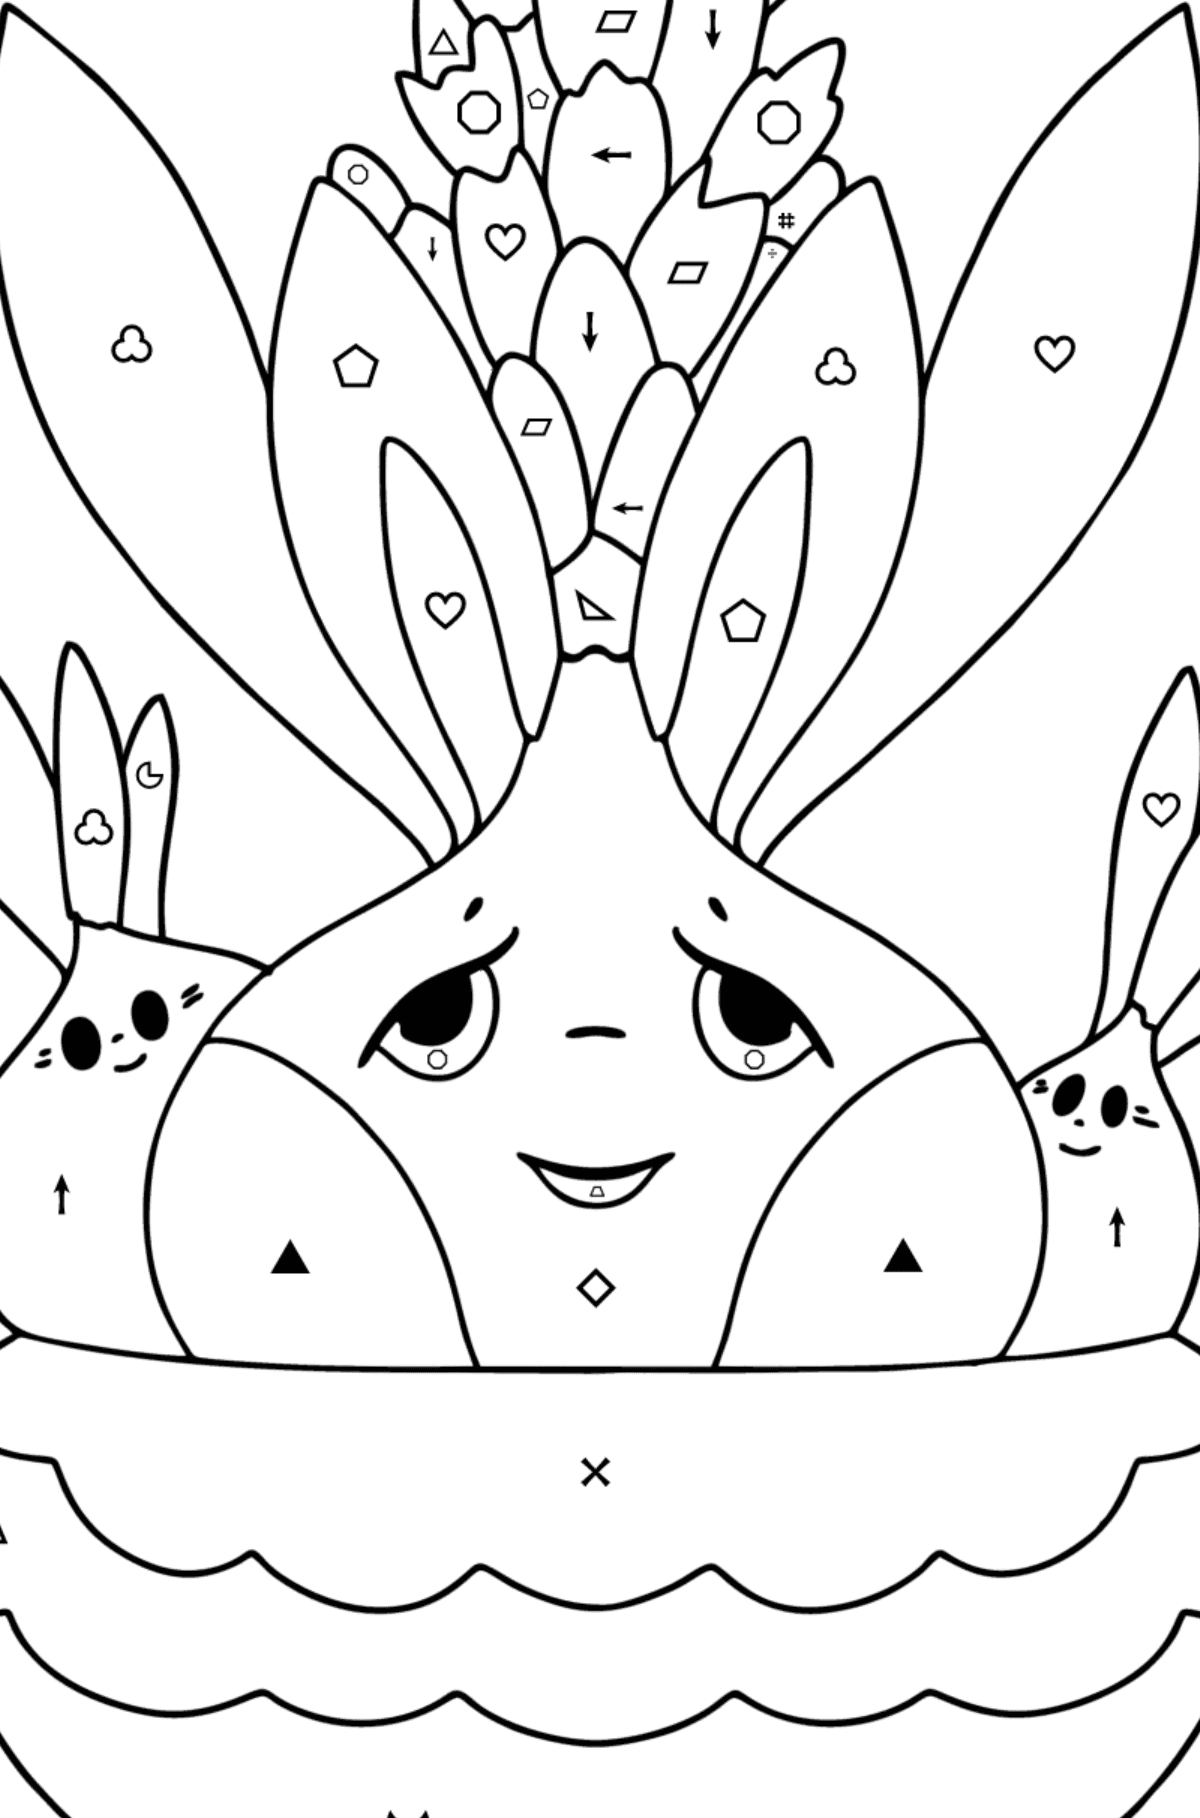 Hyacinth flowers with eyes coloring page - Coloring by Symbols and Geometric Shapes for Kids